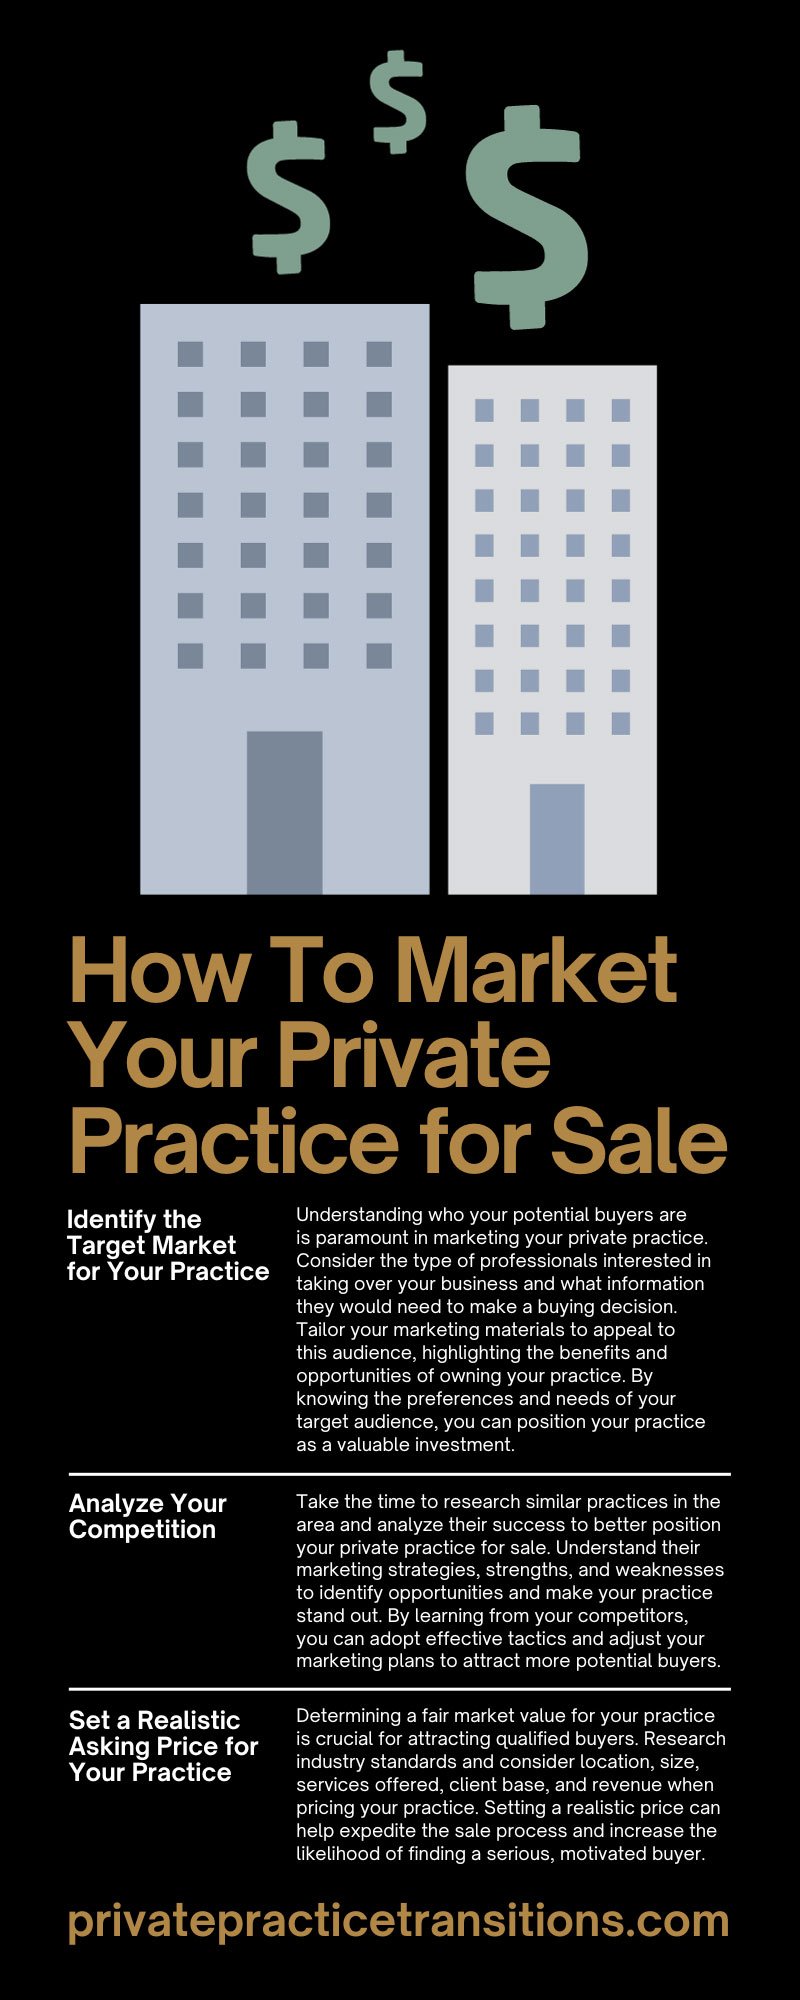 How To Market Your Private Practice for Sale